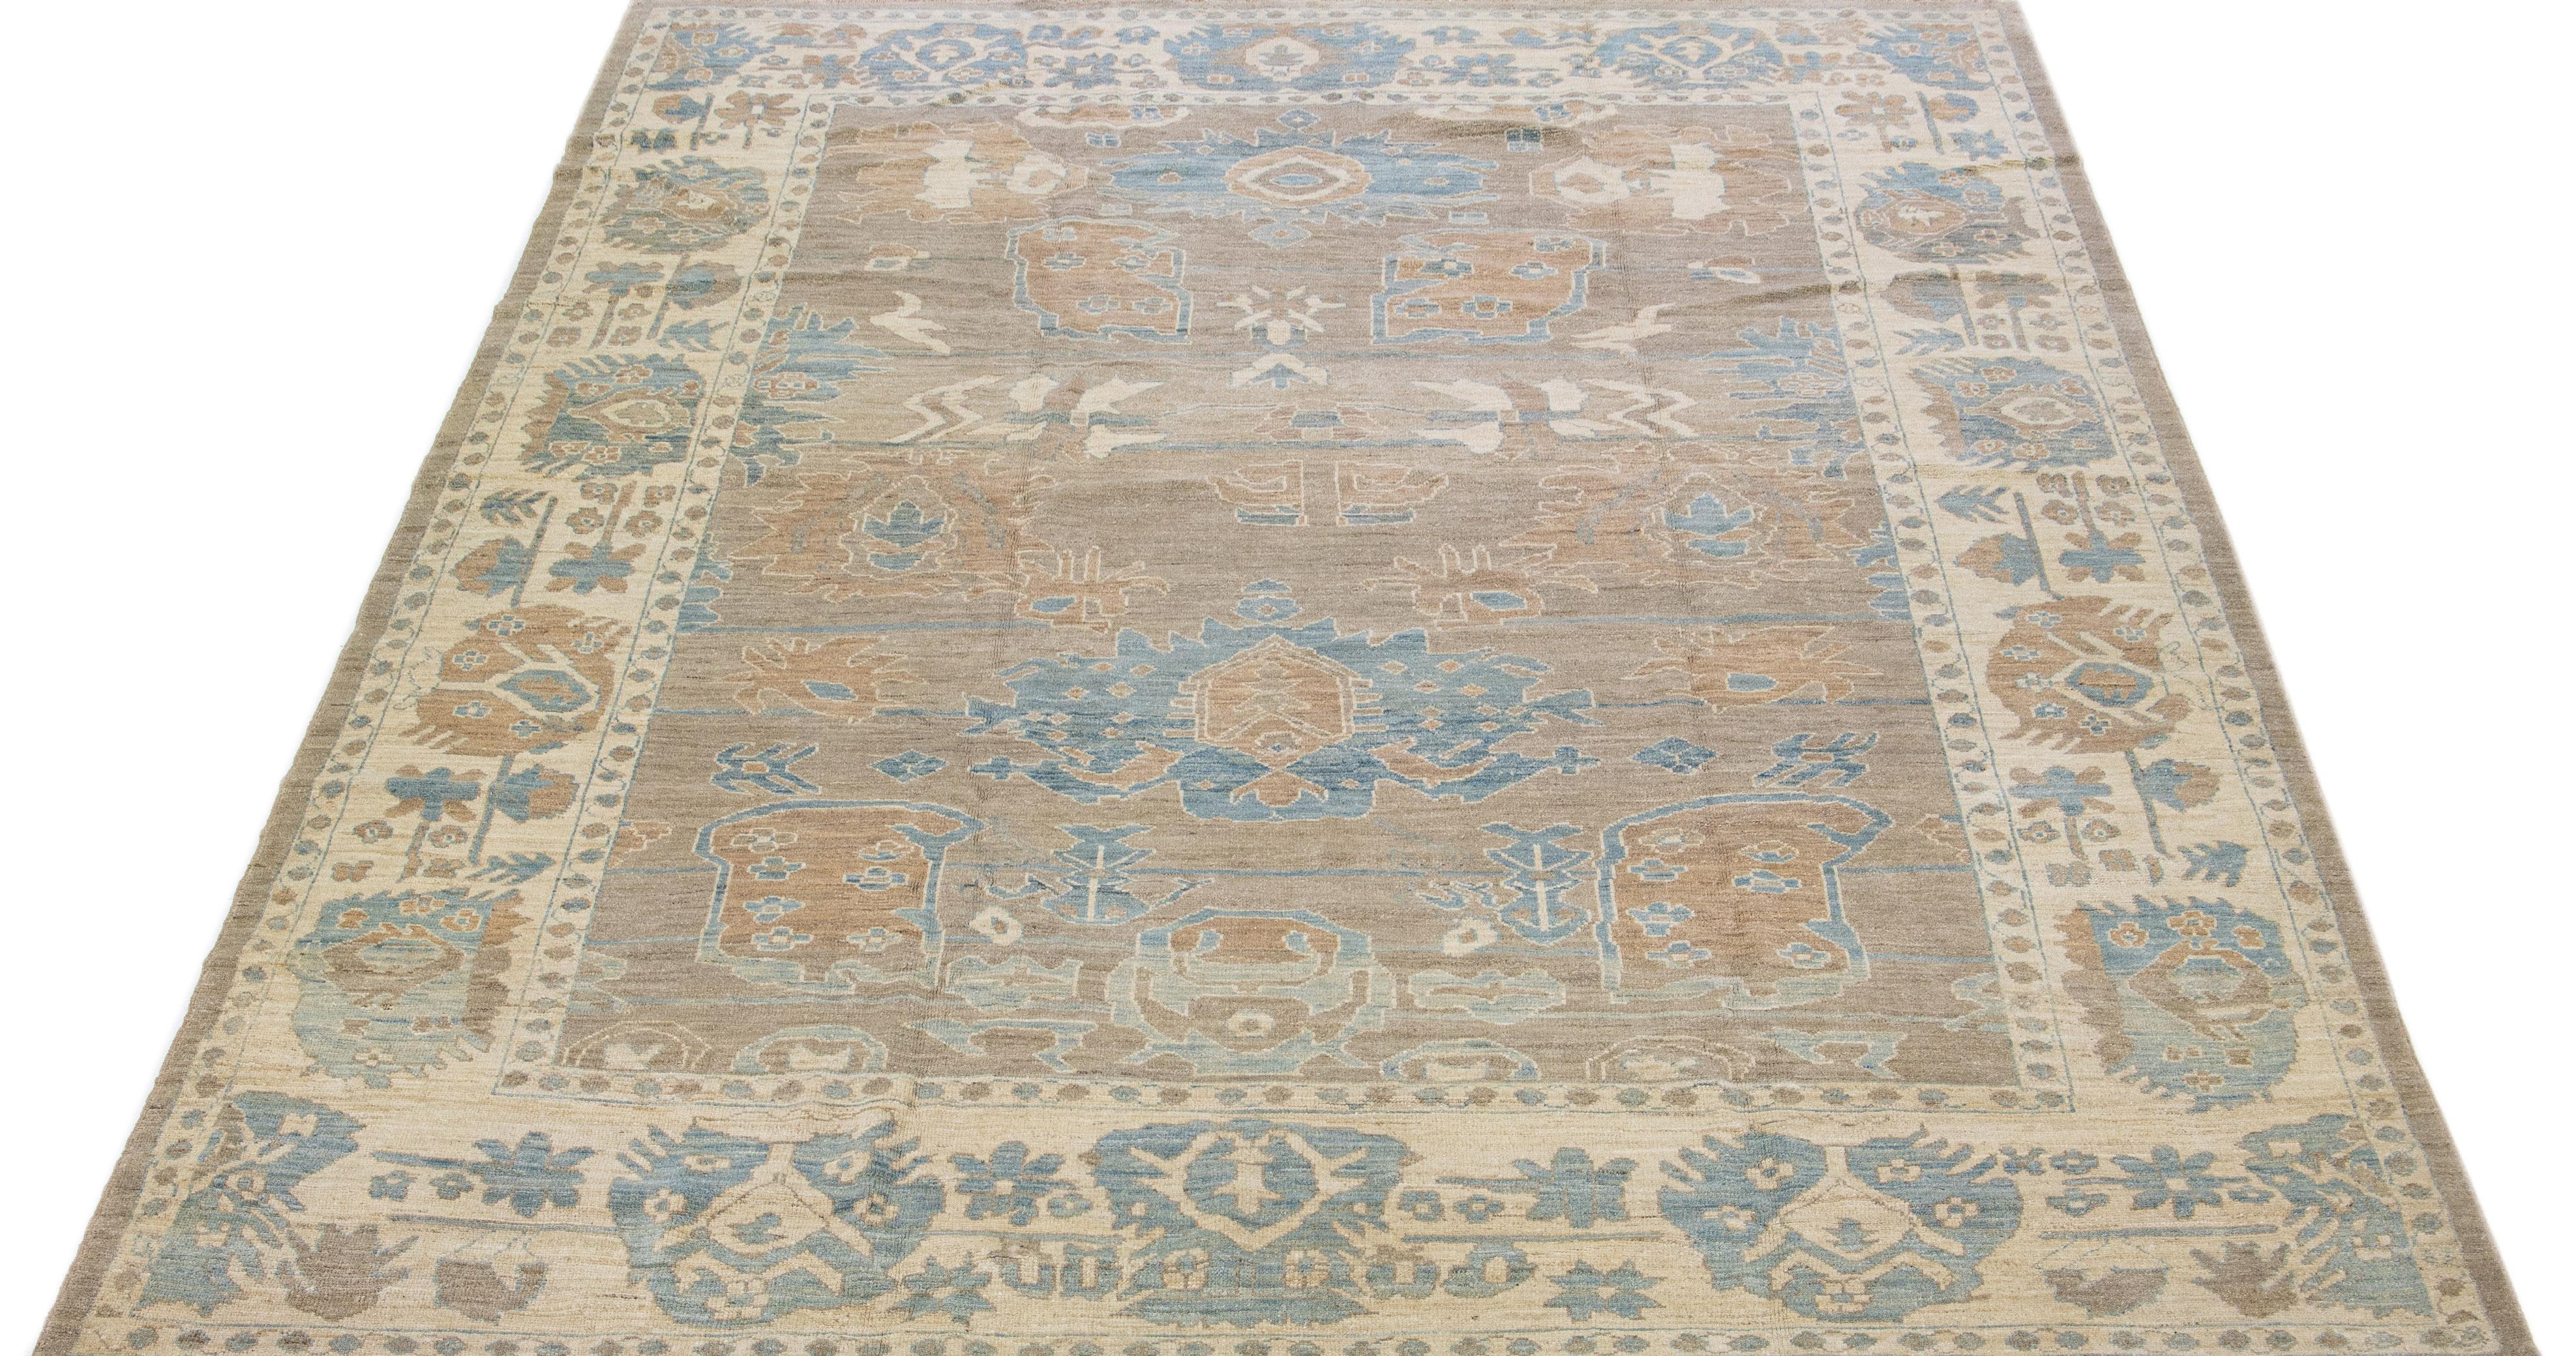 Beautiful modern Sultanabad hand-knotted wool rug with a light brown color field. This rug has blue accents in a gorgeous all-over floral design.

This rug measures: 10'4